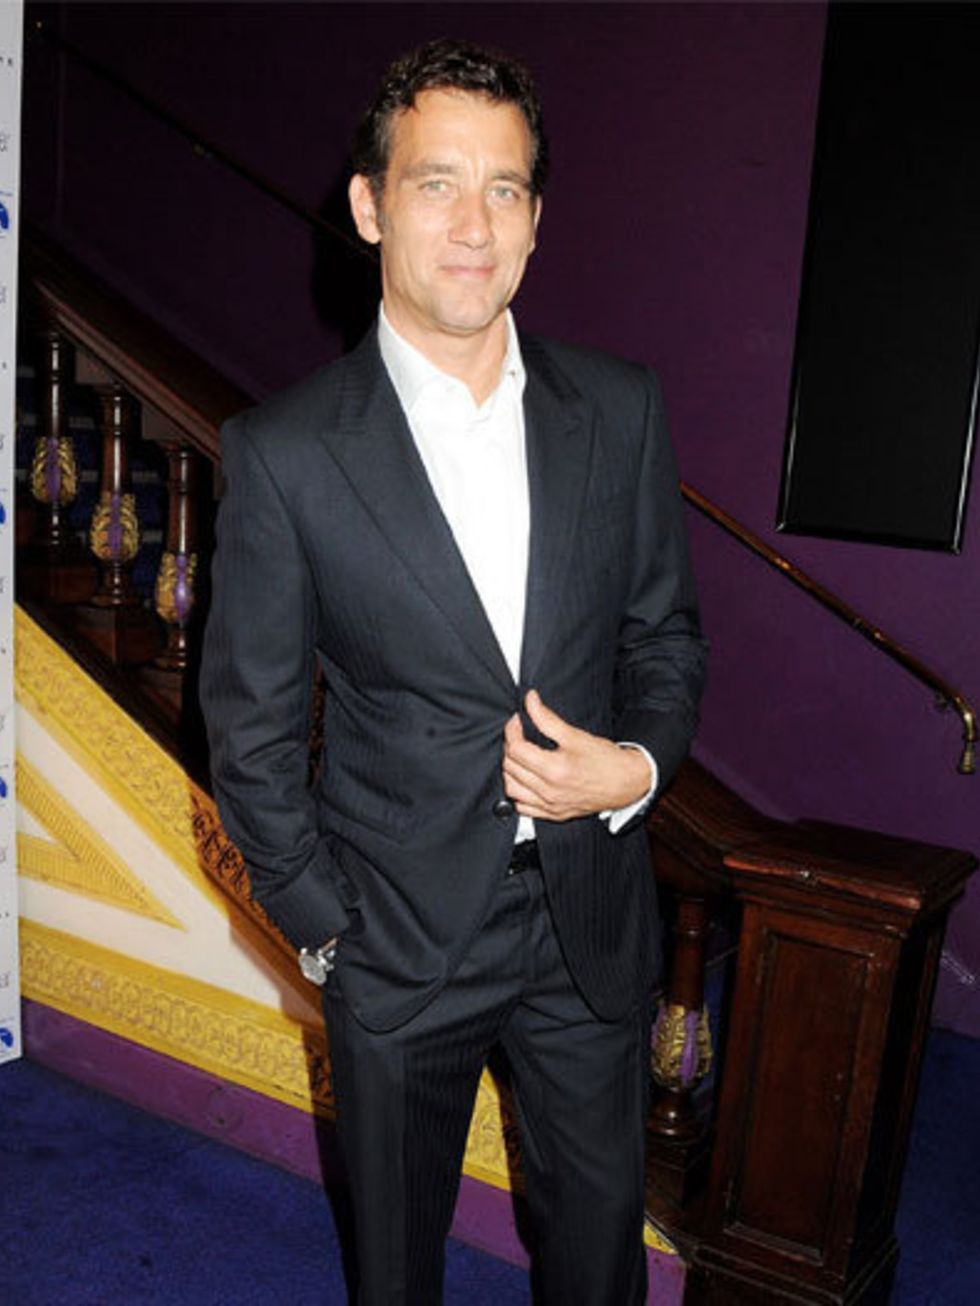 <p>Clive Owen plays an MI5 agent in political/spy thriller Shadow Dancer. He attended the UK premiere in London.</p>